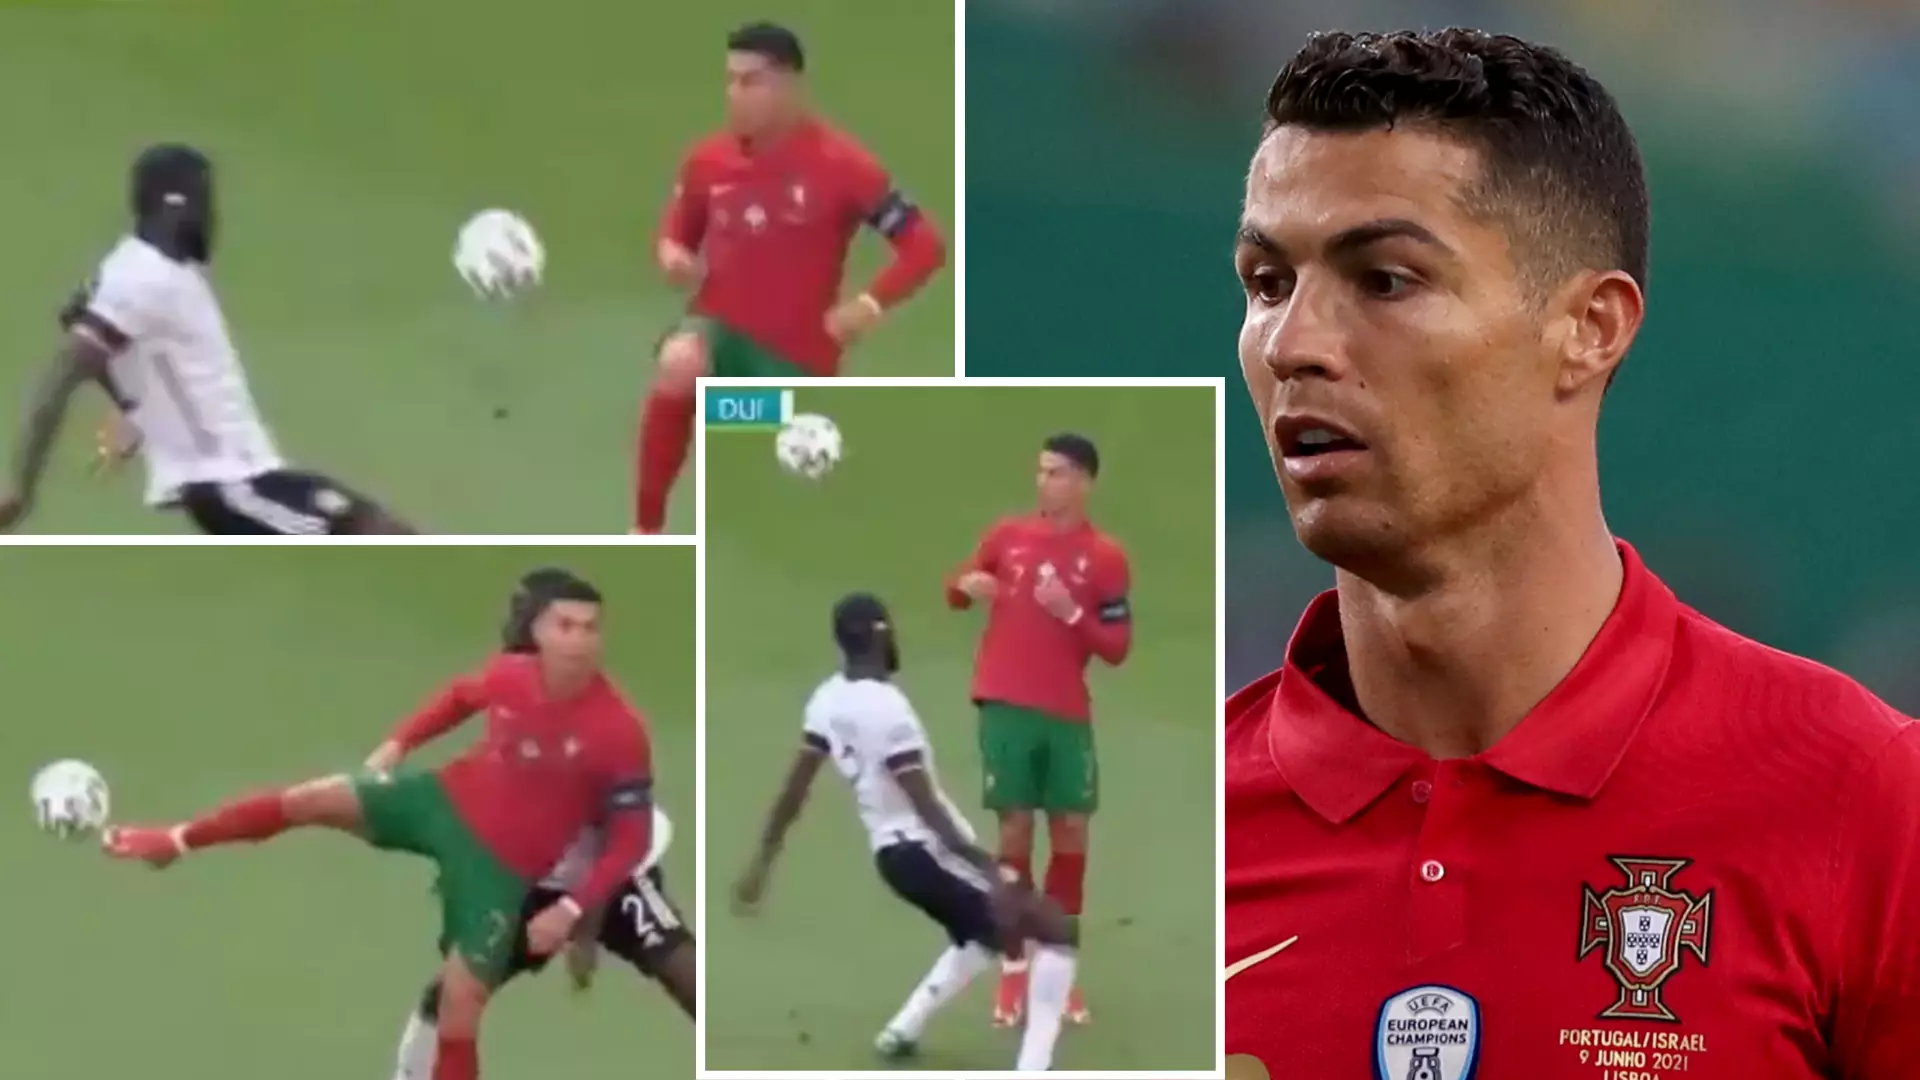 Cristiano Ronaldo Blasted As A 'Fool' After Showboating Skill Against Antonio Rudiger In Portugal Defeat